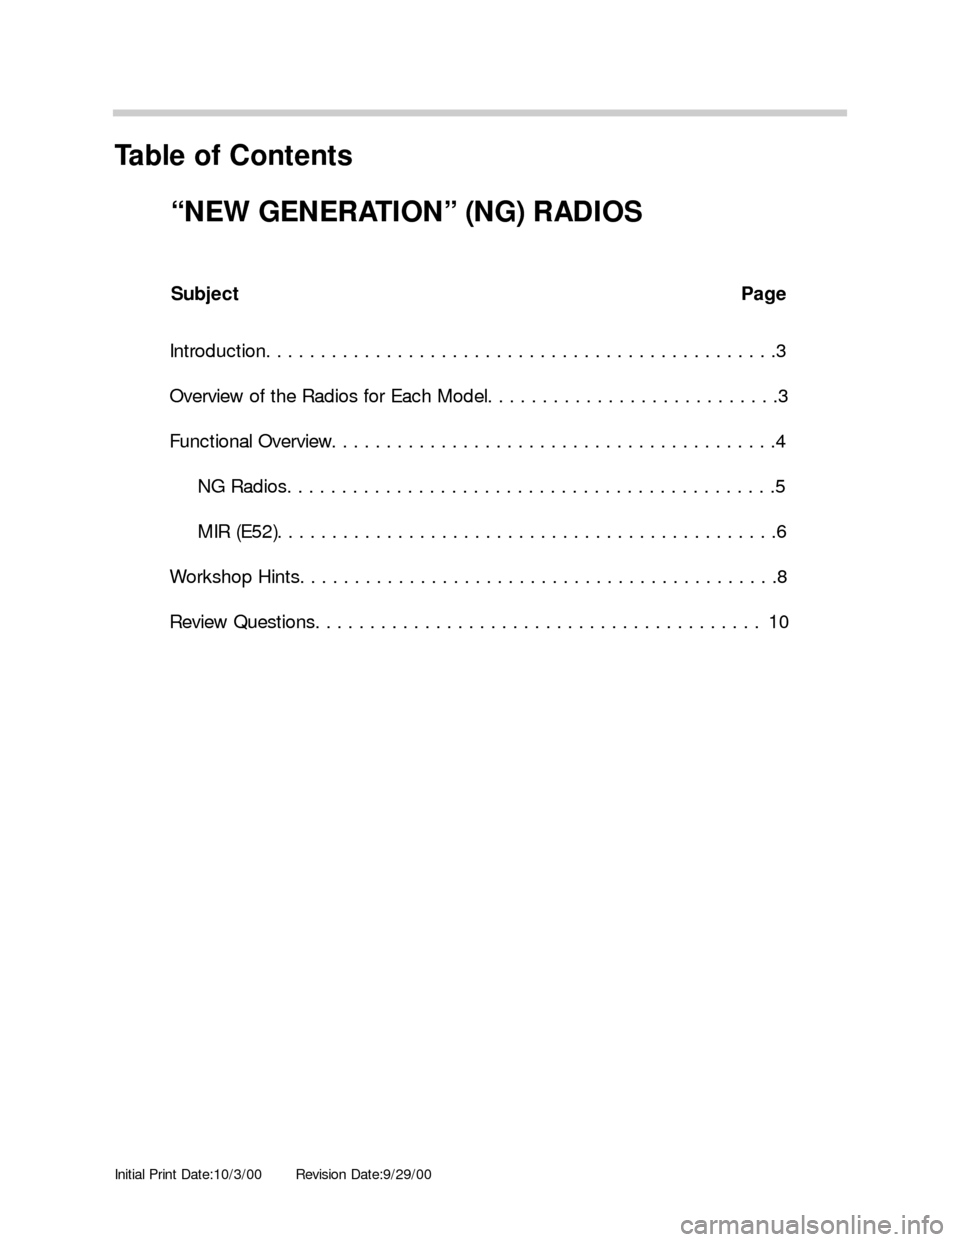 BMW 5 SERIES 2002 E39 New Generation Radios Manual Initial Print Date:10/3/00Revision Date:9/29/00
Subject Page
Introduction. . . . . . . . . . . . . . . . . . . . . . . . . . . . . . . . . . . . . . . . . . . . . . .3
Overview of the Radios for Each 